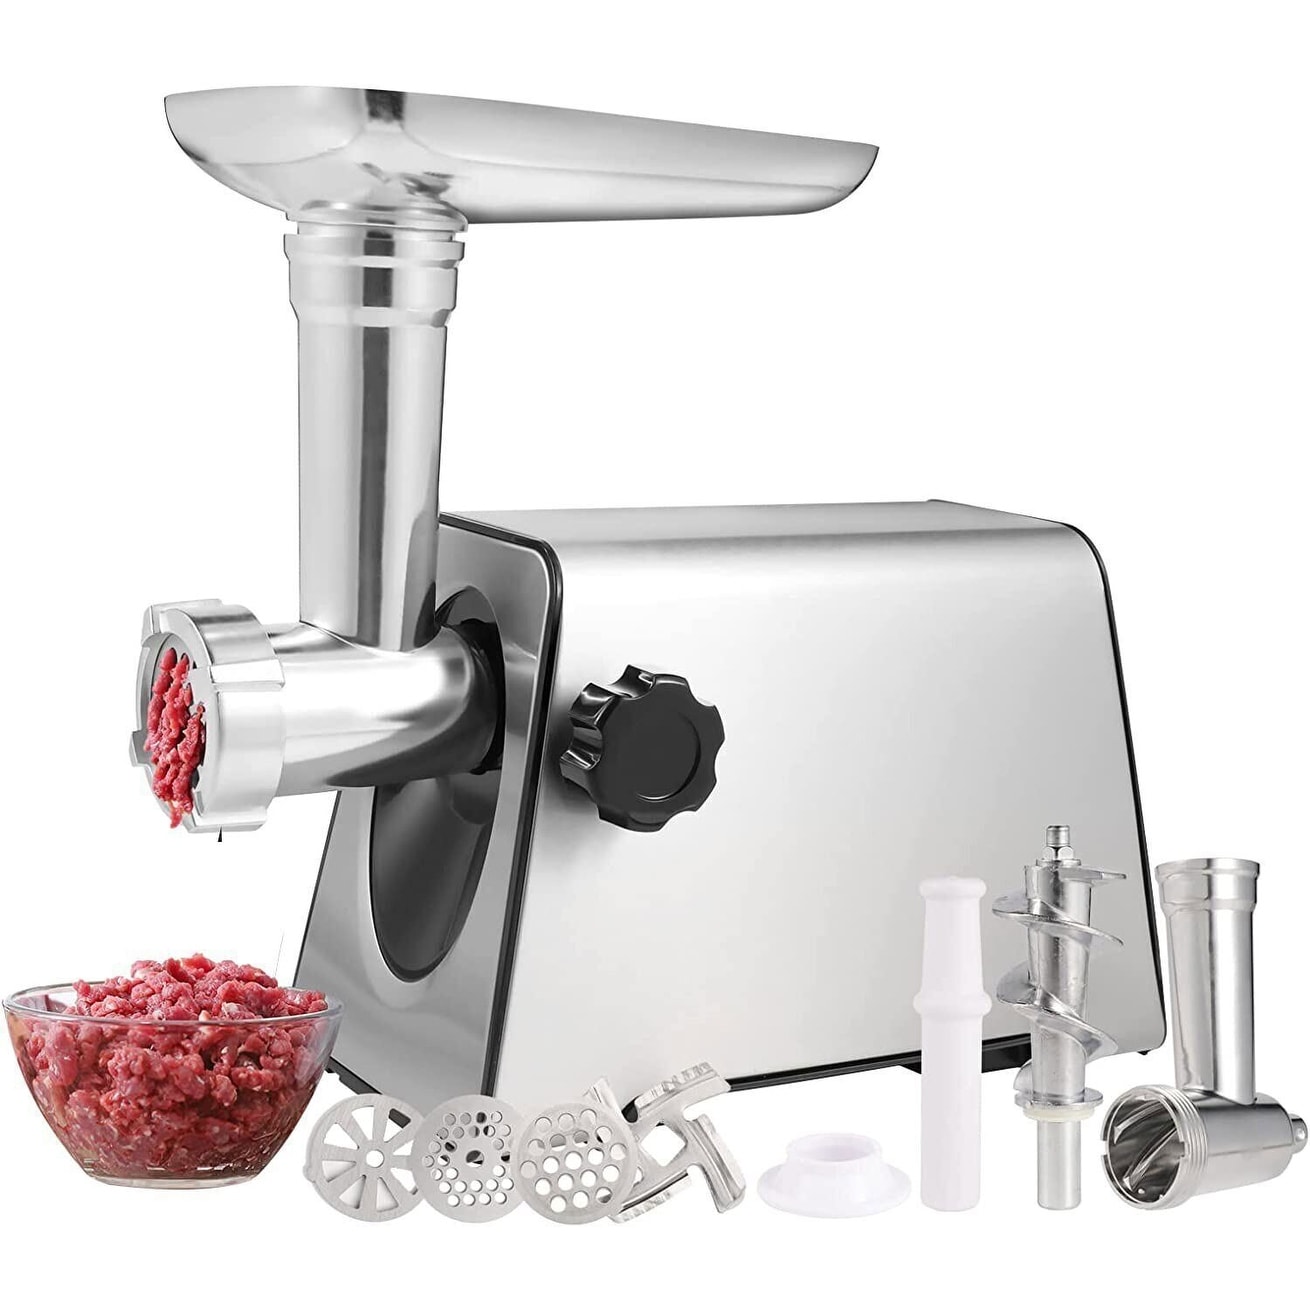 Simple Deluxe Electric Meat Grinder, Heavy Duty Me...